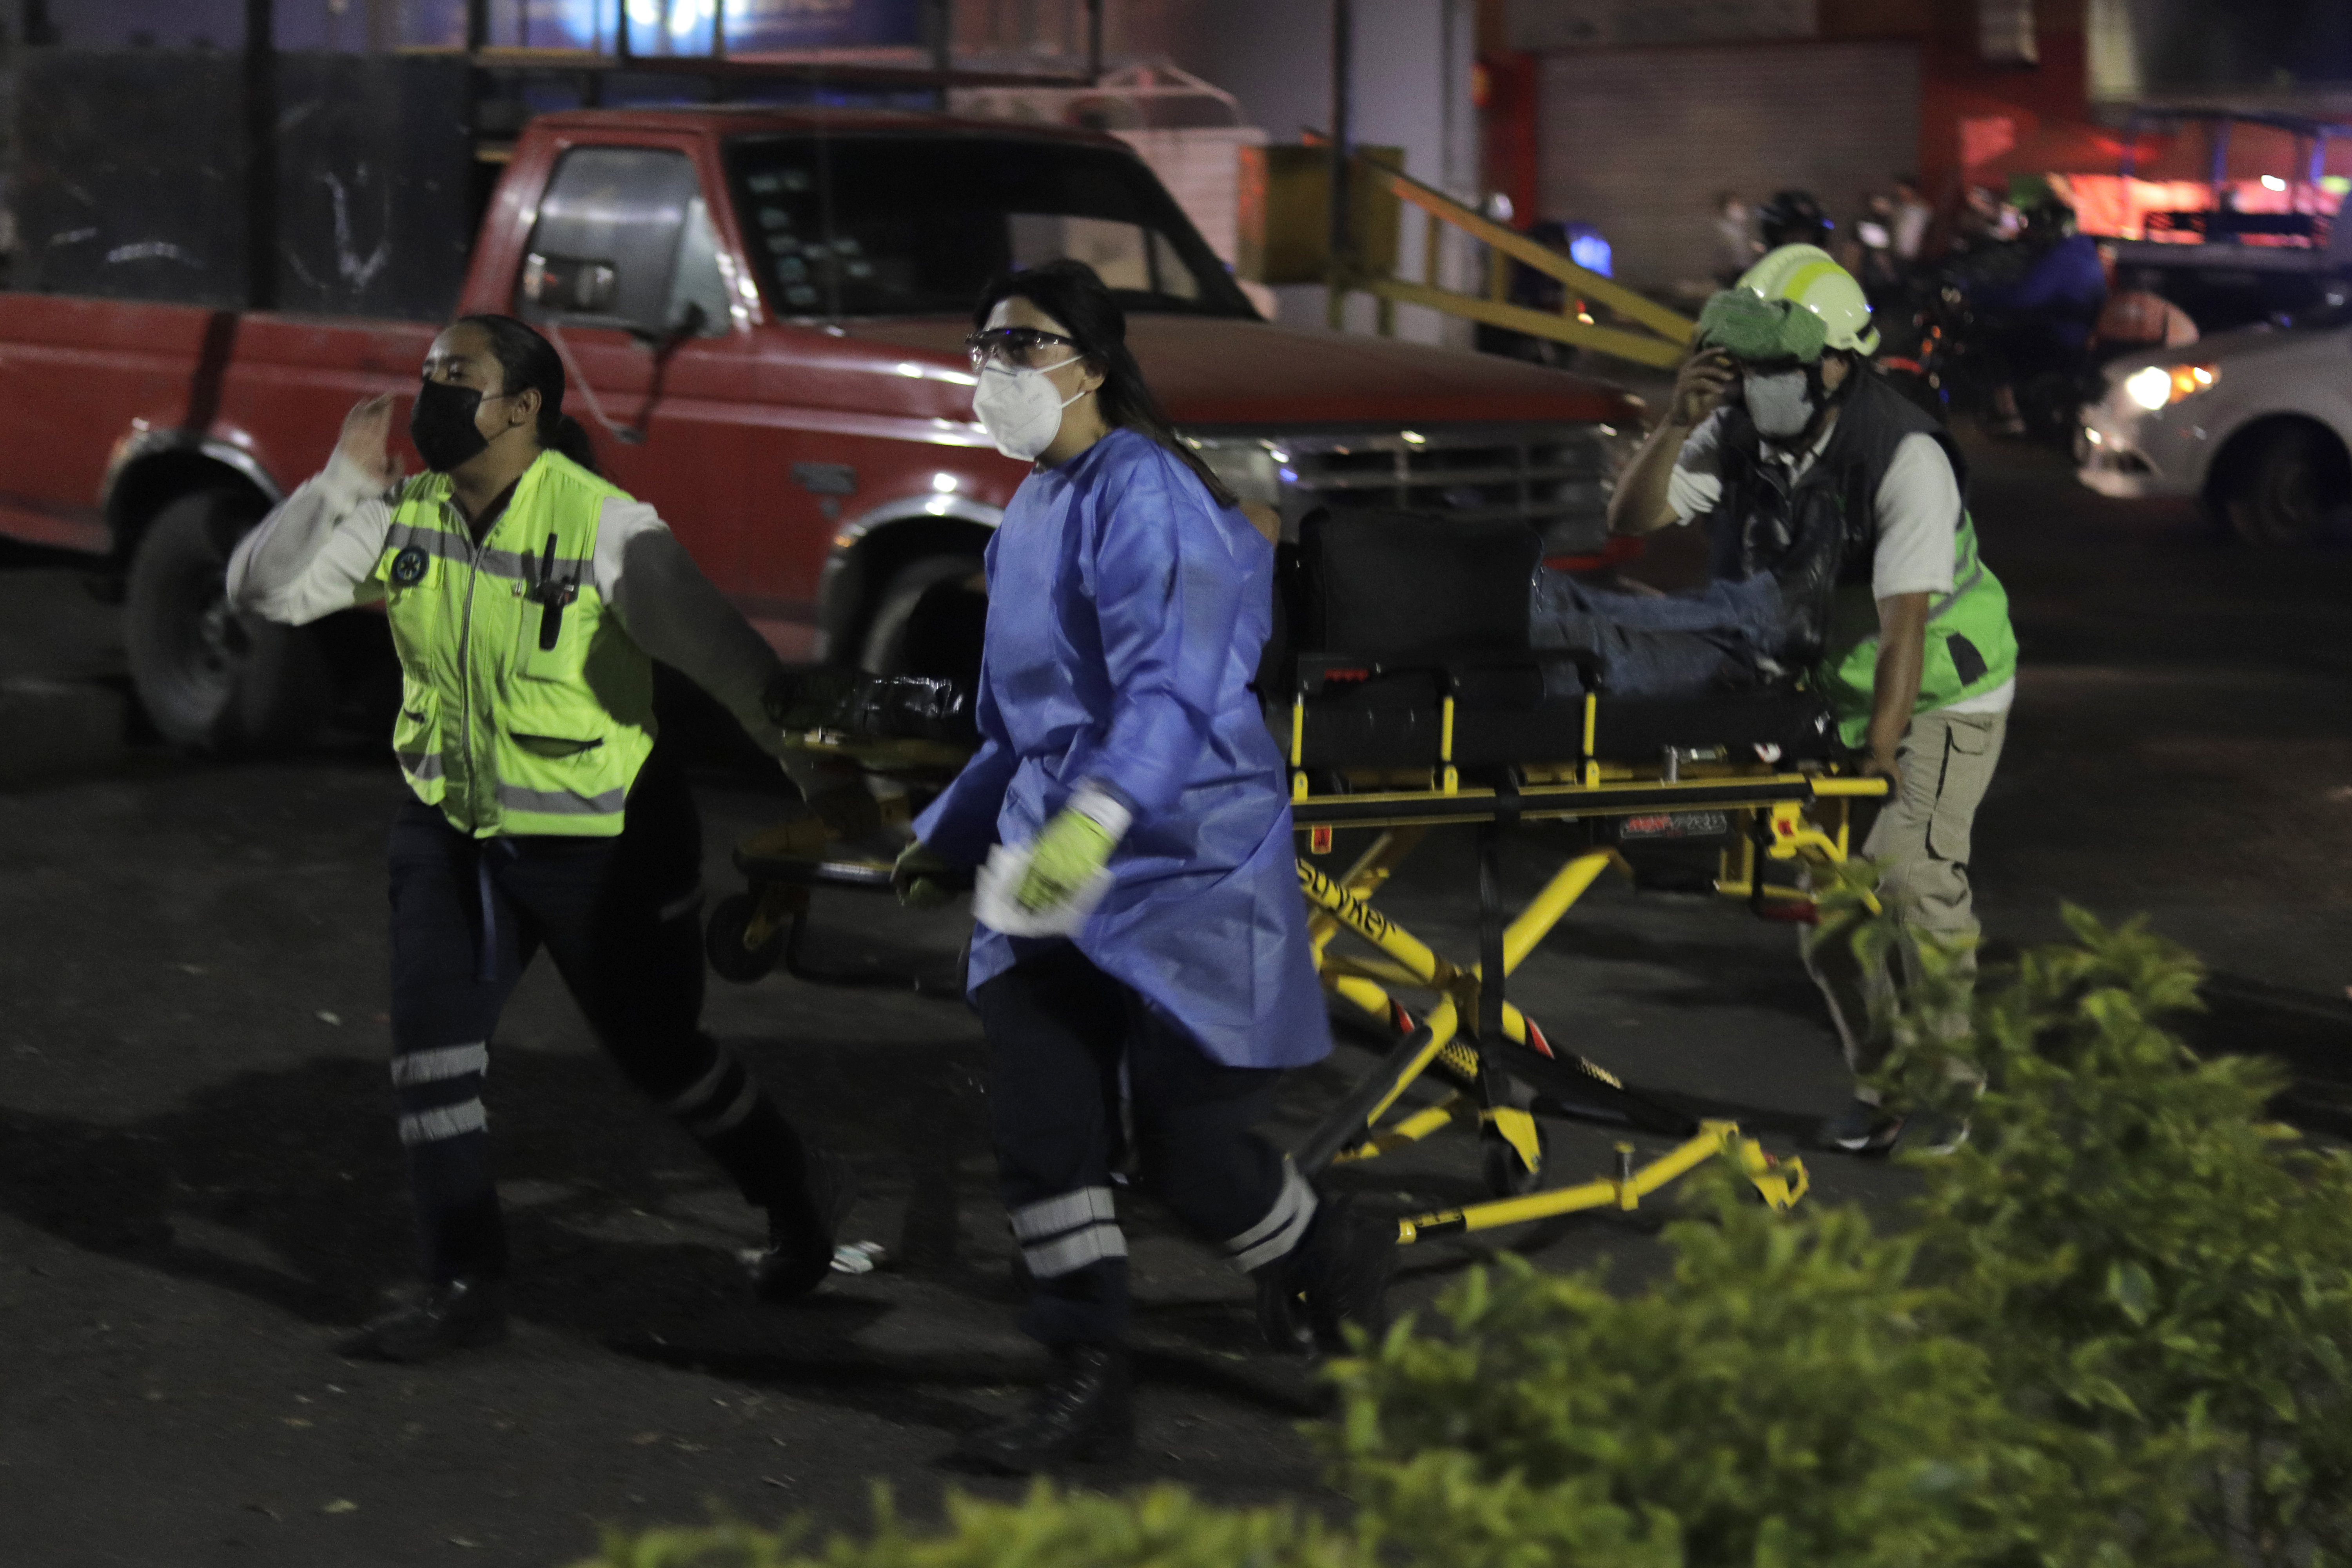 Paramedics transfer an injured person on a stretcher to be taken to a hospital after the collapse of a structure on Line 12 Metro in Mexico City between Tezonco and Olivos stations, where 20 people died and more than 70 were injured. The causes of the accident are still unknown.